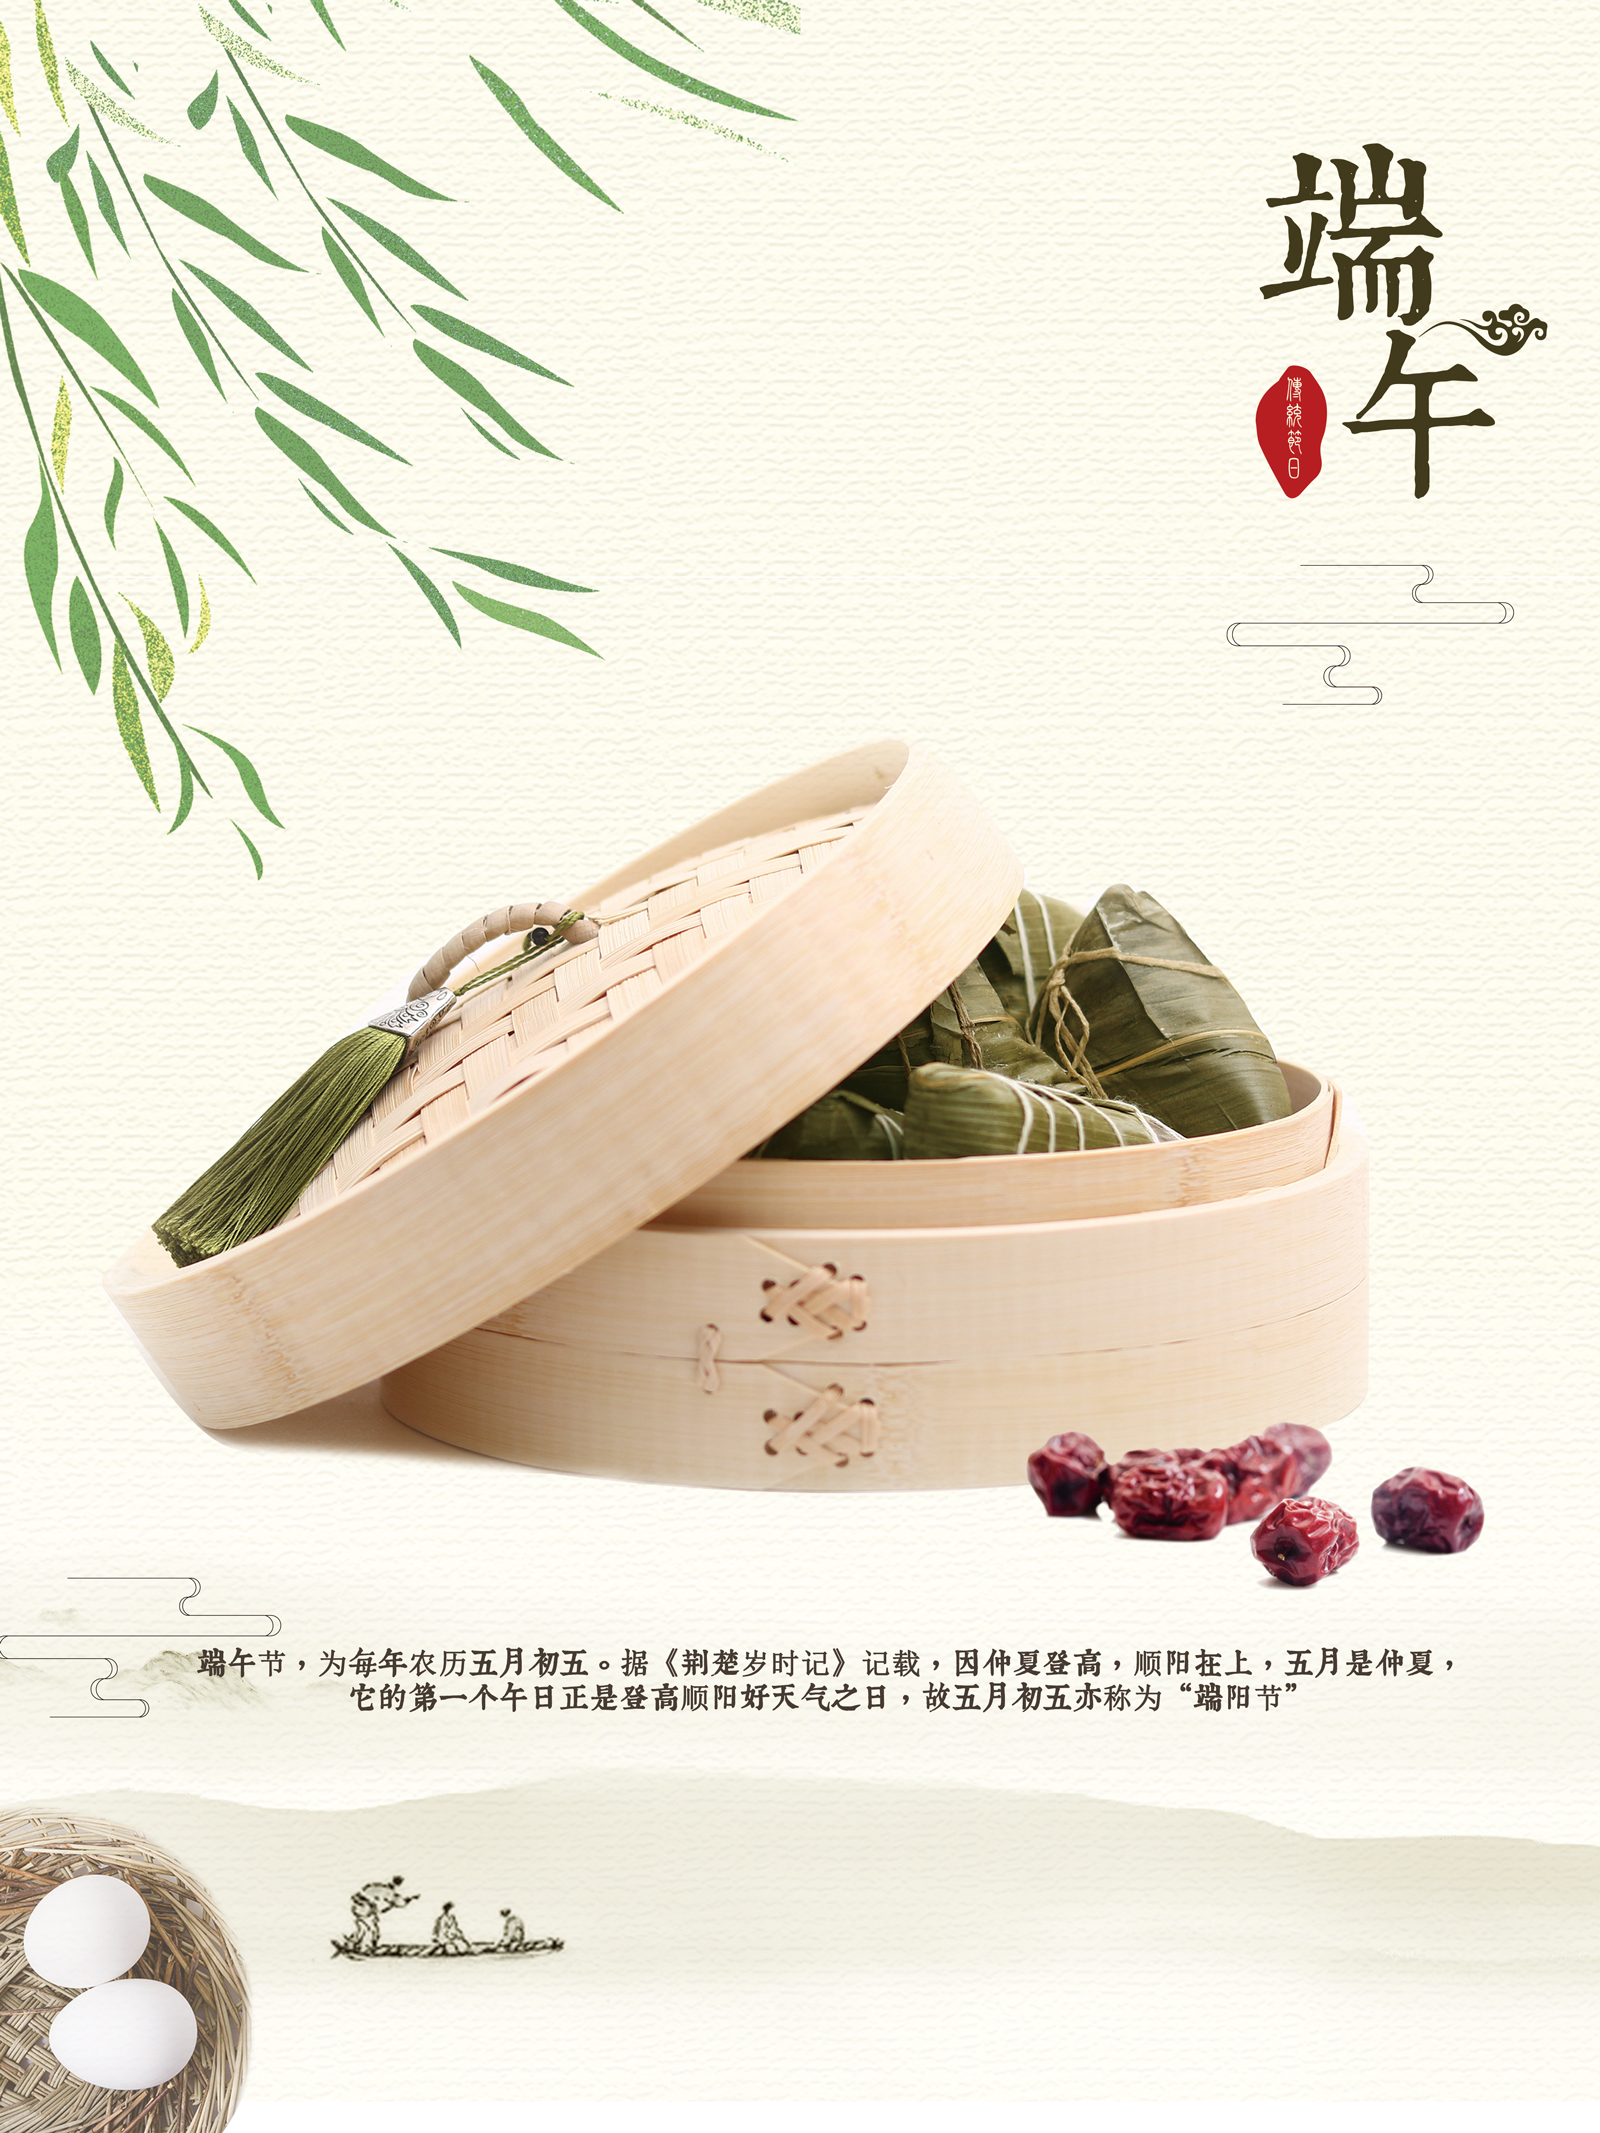 Chinese traditional style Dragon Boat Festival poster design PSD File Free Download #.2